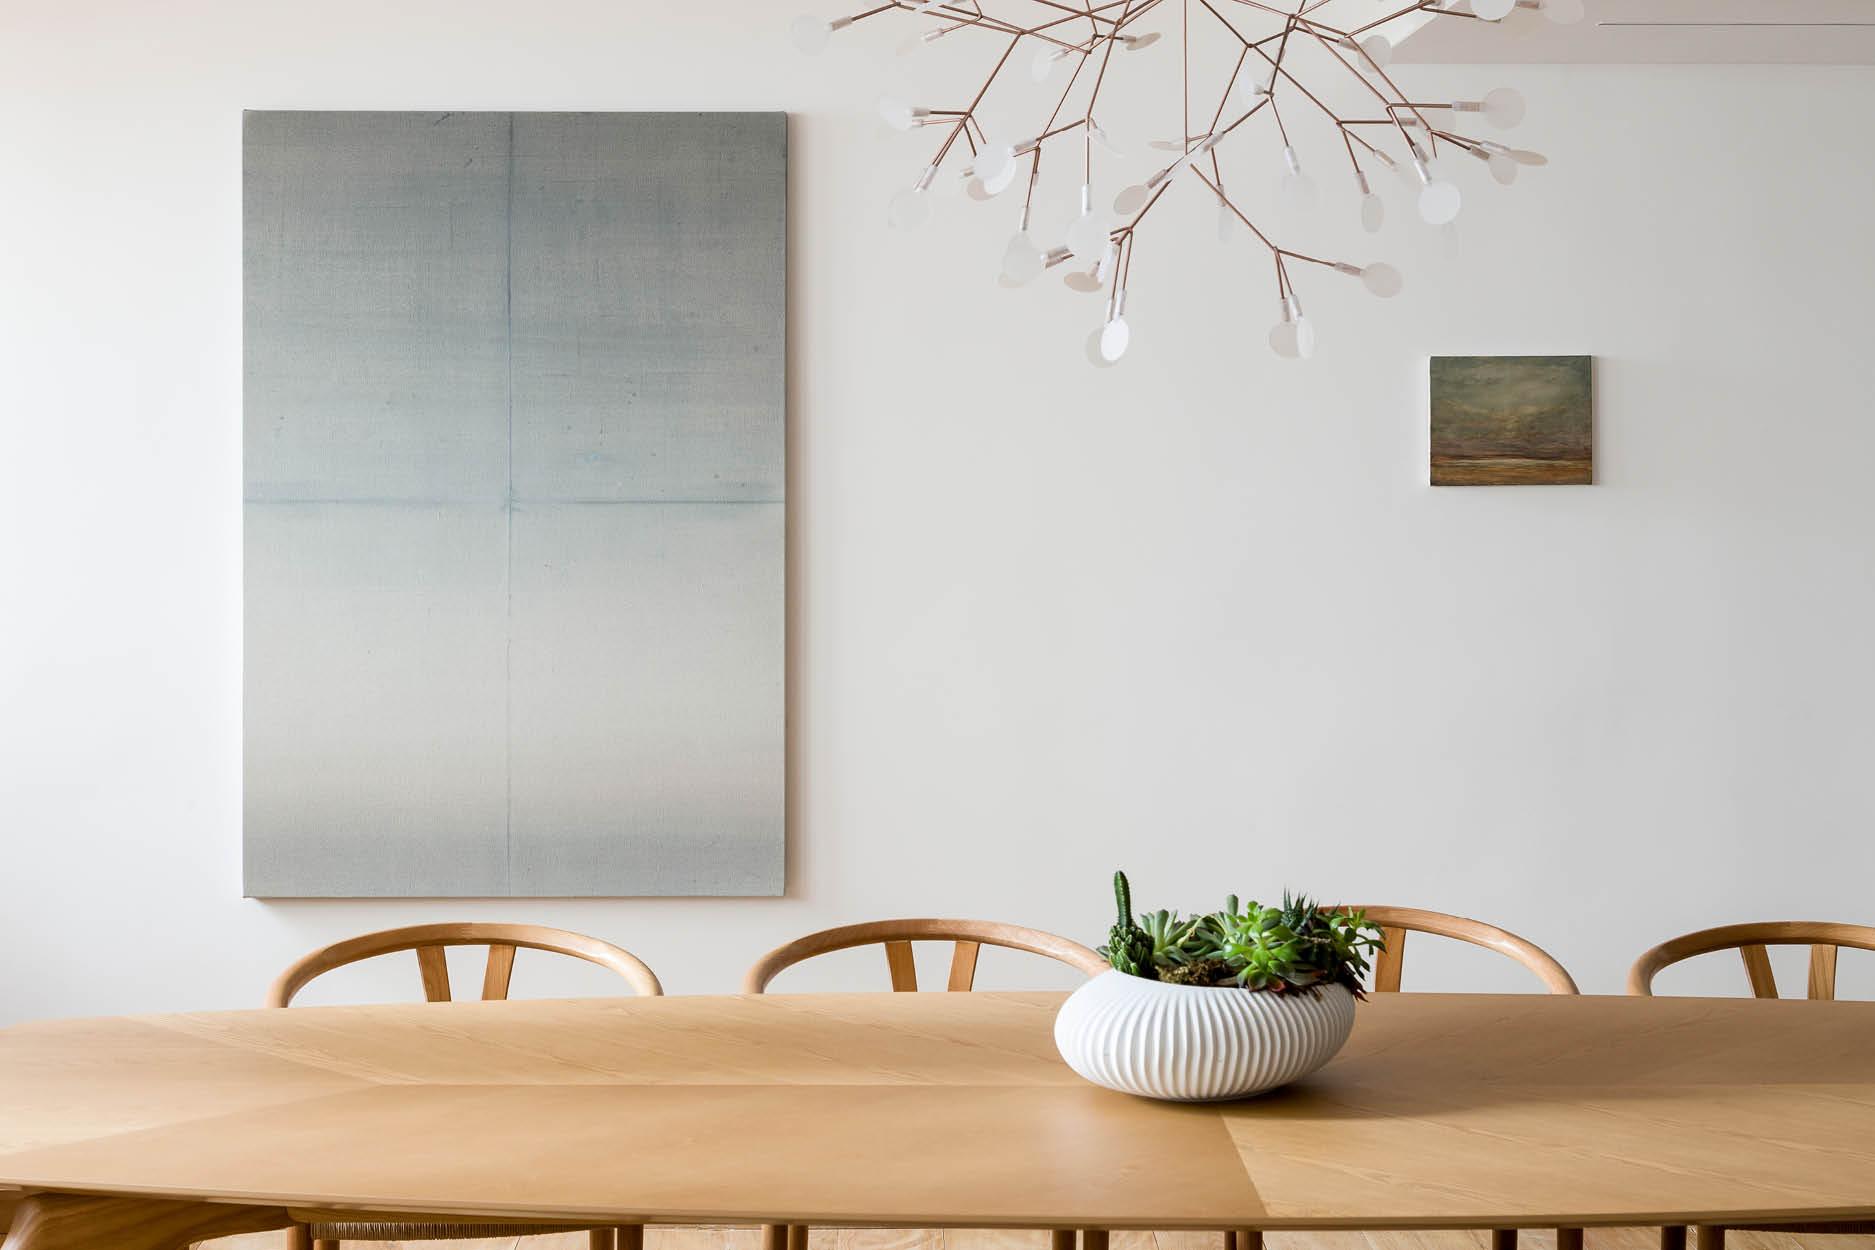 A Marble Chopping Board and Haute Couture Meet in this São Paulo Home